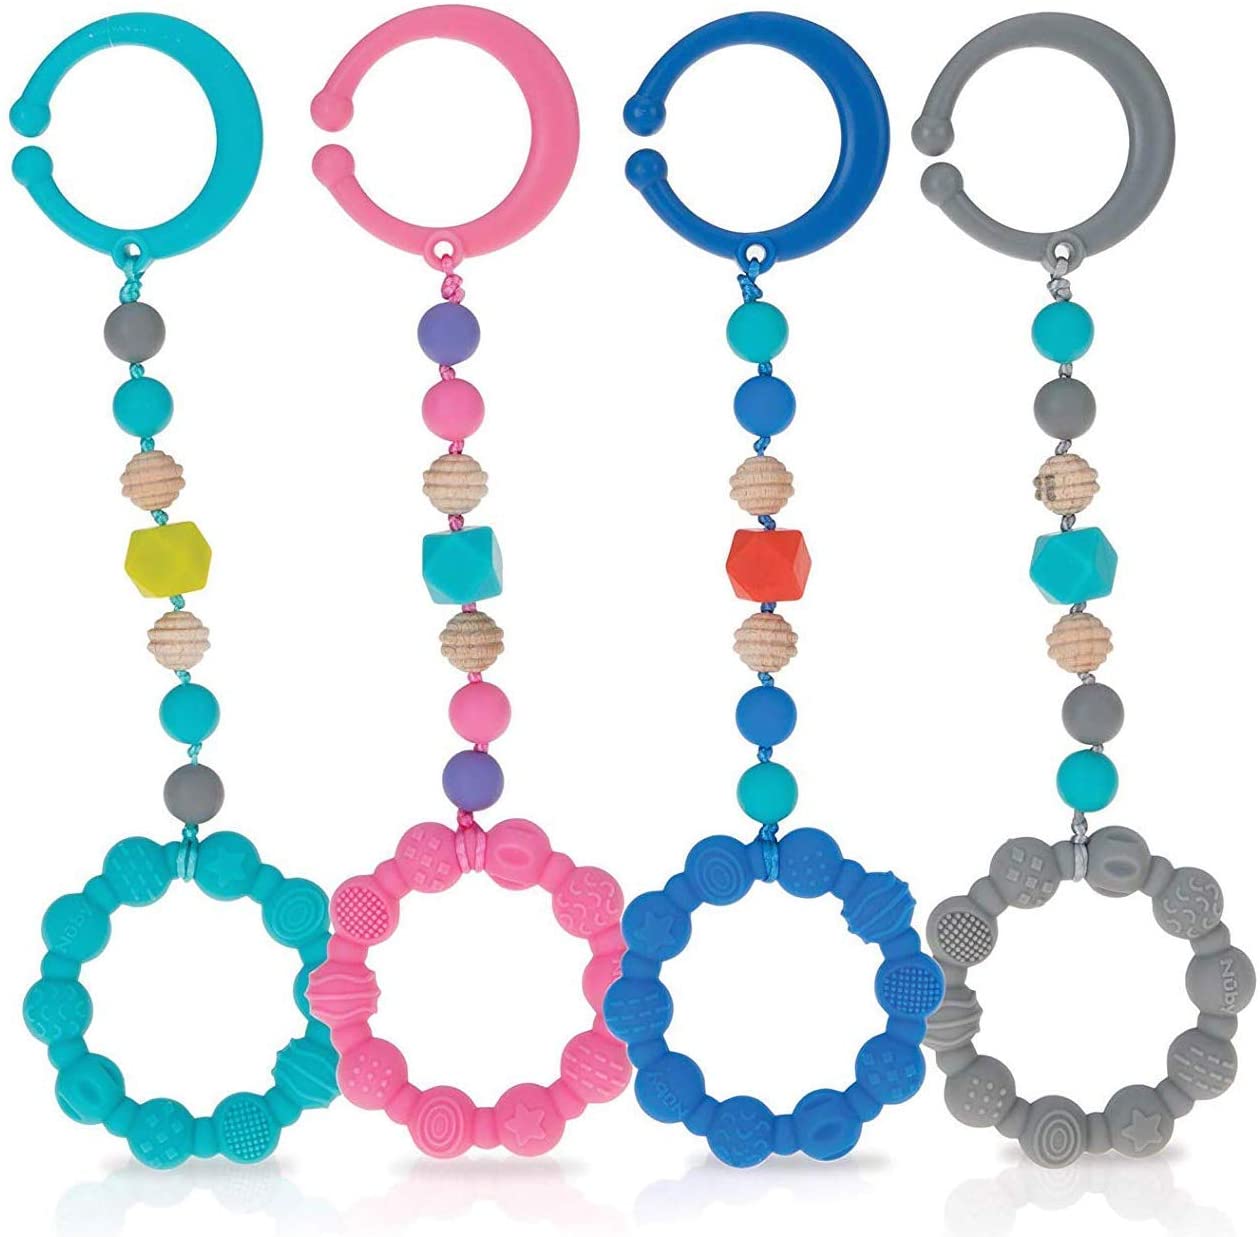 Nuby 100% Silicone Teether Ring with Silicone Beaded String and Clip for Carseat and Stroller, 3 Months + (Aqua)